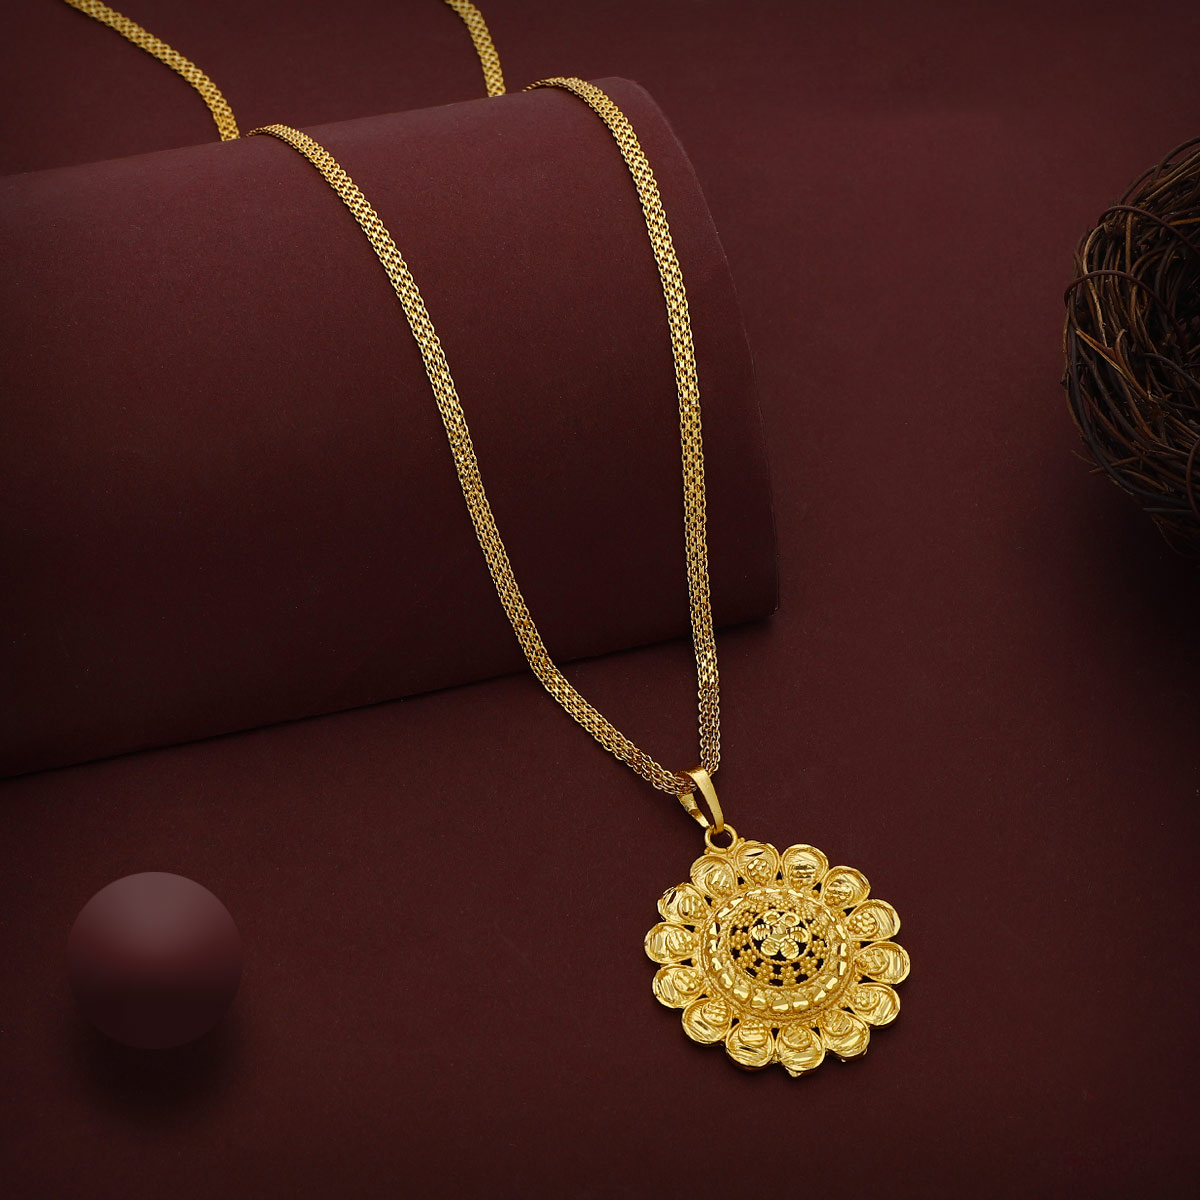 24K GOLD PLATED CHAIN WITH PENDENT CWP-612